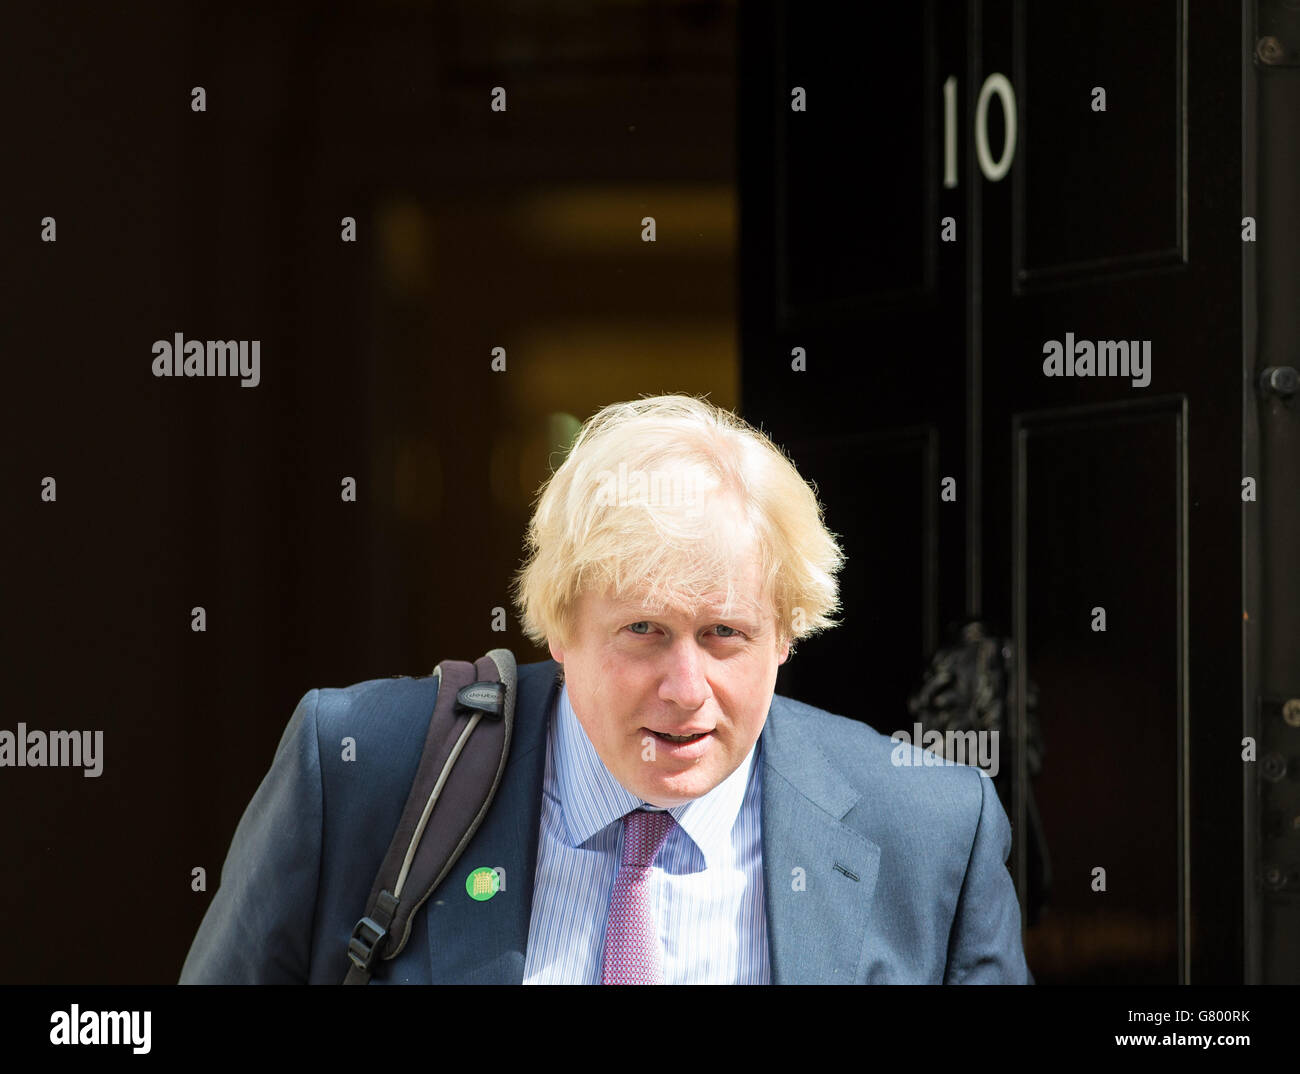 Mayor of London, Boris Johnson arrives at 10 Downing Street in London for talks with David Cameron as the PM puts the finishing touches to his new cabinet. Stock Photo